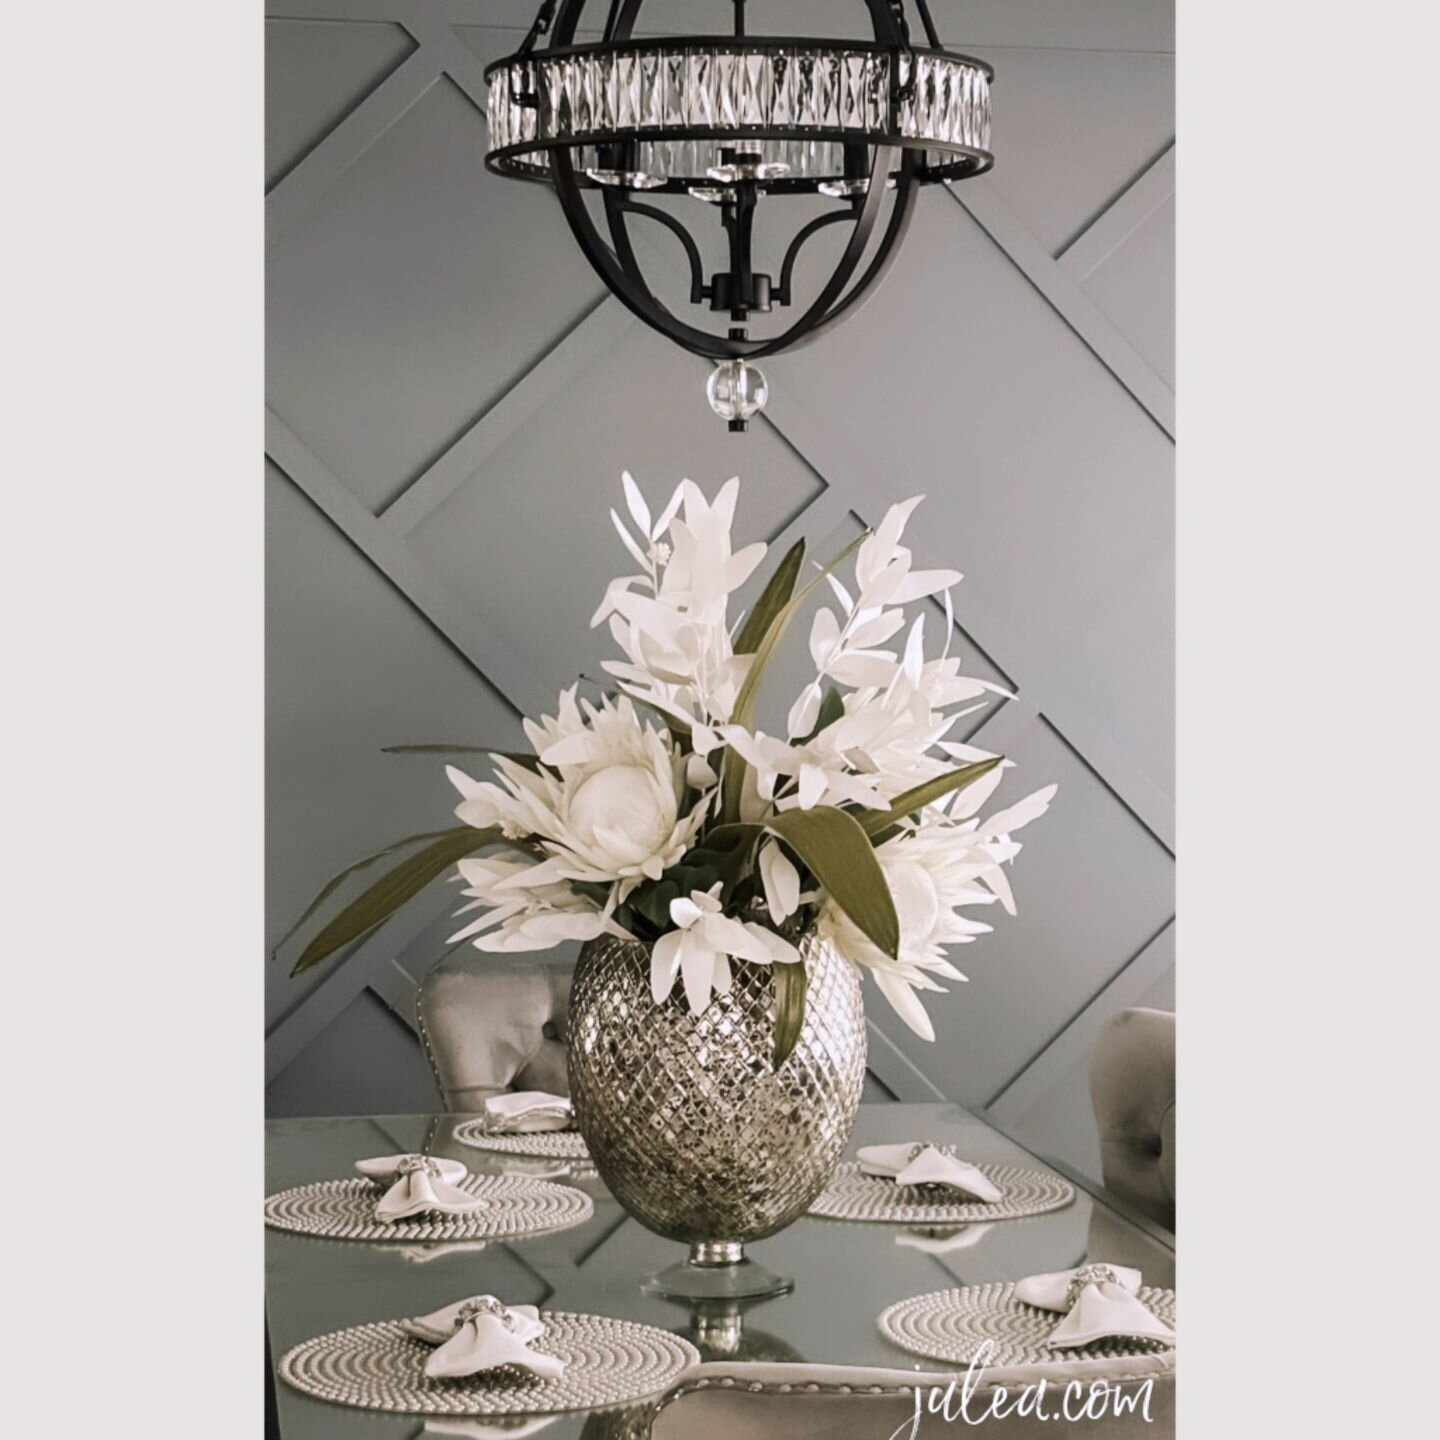 Another beautiful custom floral for a client.  We perfectly curate spaces with your personality + lifestyle in mind abd execute your vision. #professionalshopper #homedecor #homeaccents #customflorals #whiteflowers #floral #mercuryglass #curatedhome 